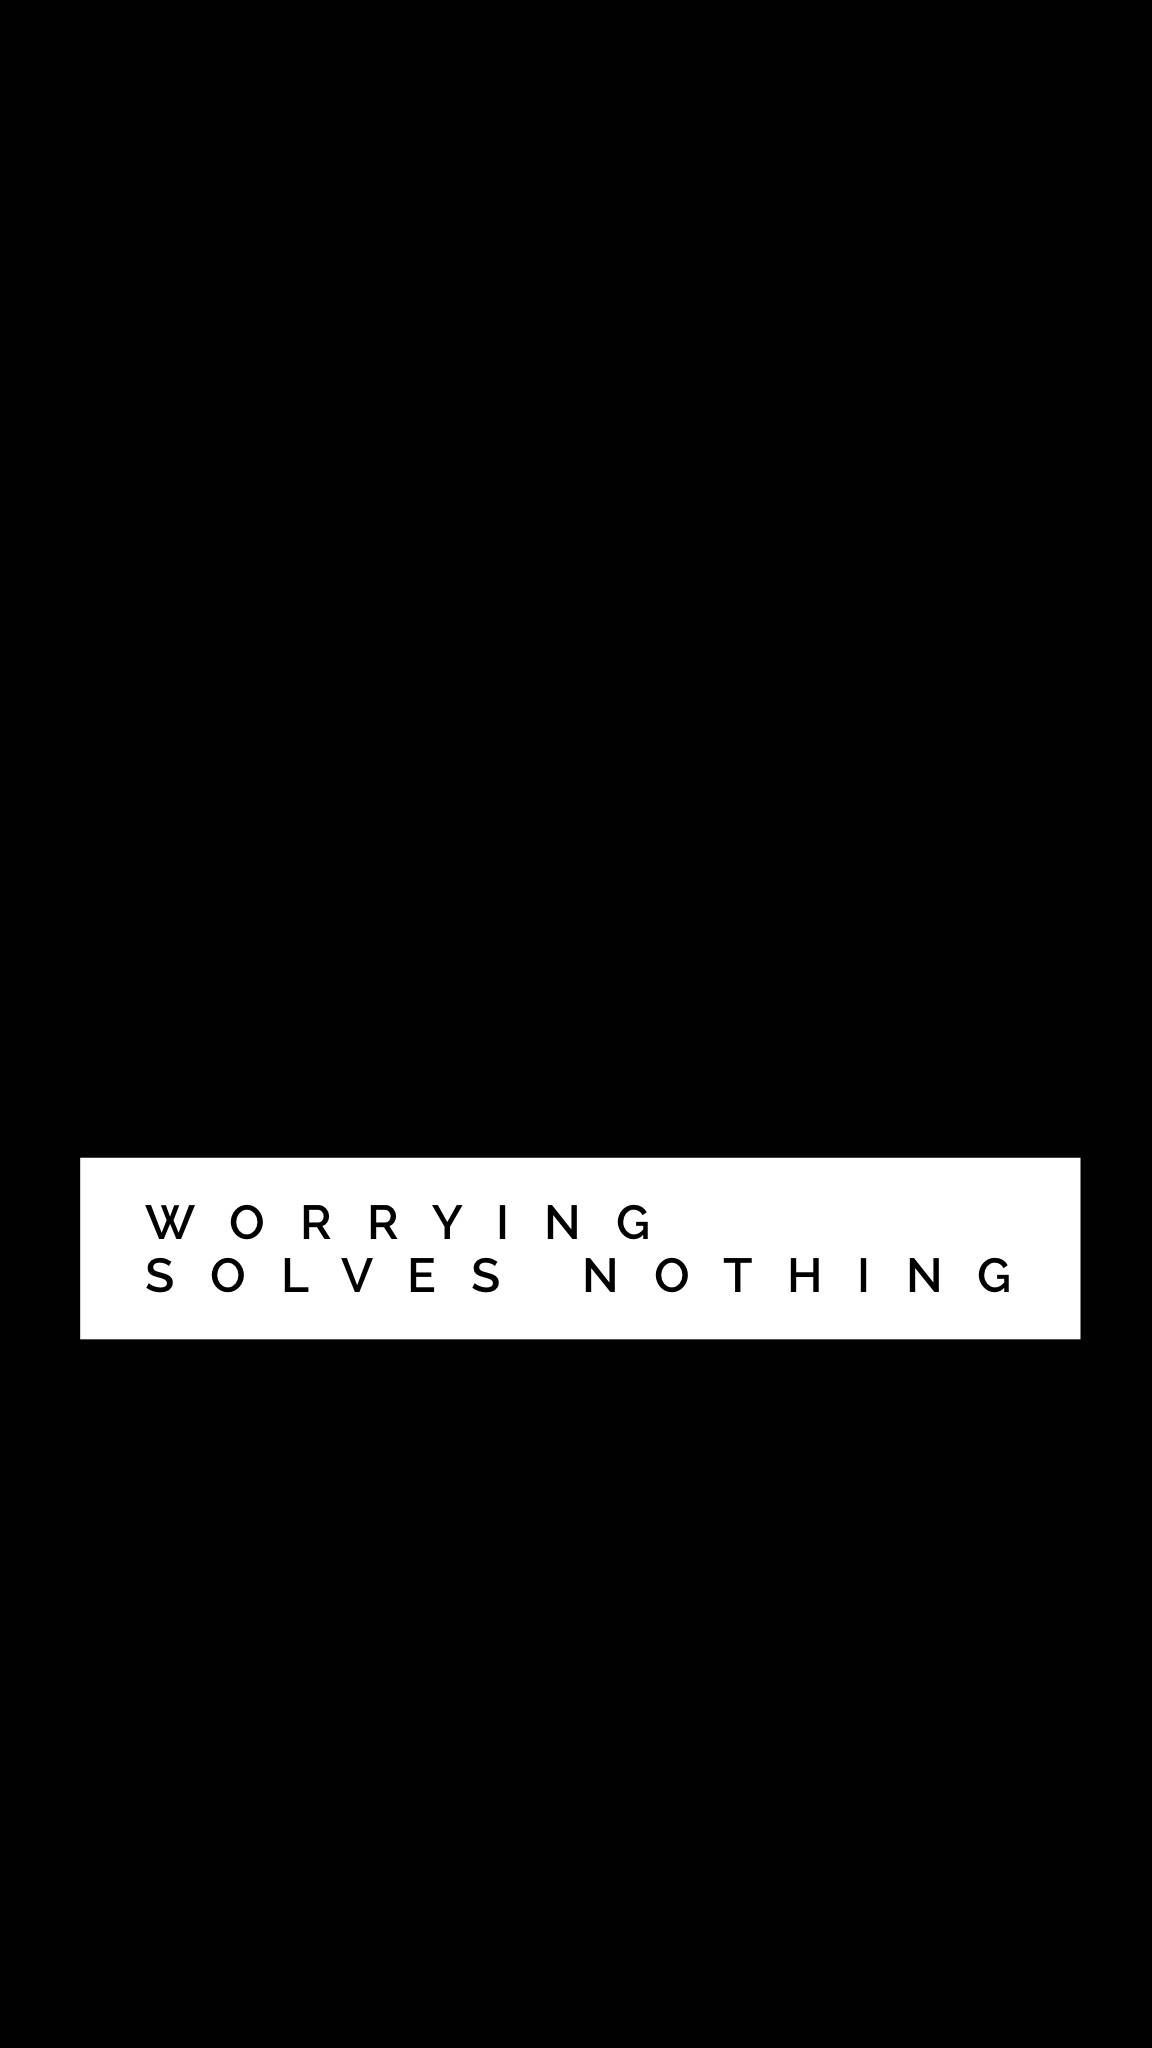 Worrying Solves Nothing Black And White Quotes Wallpaper